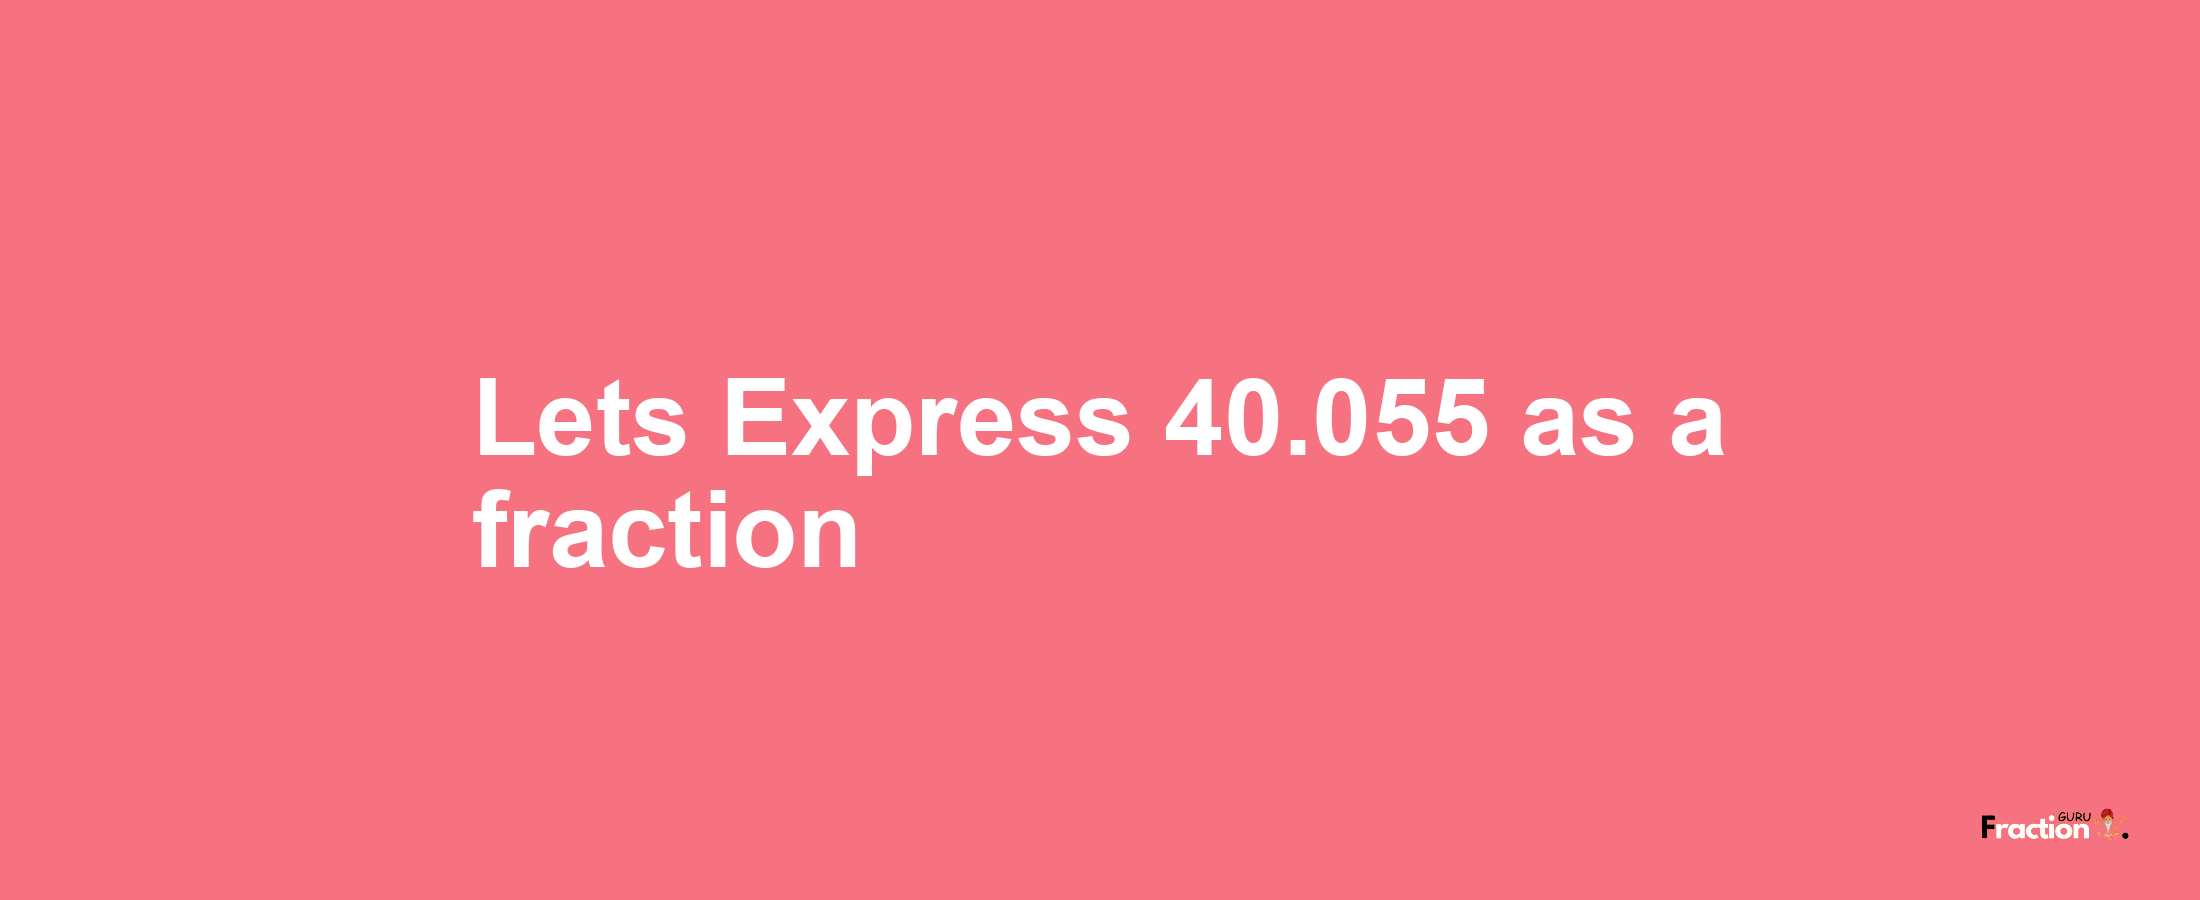 Lets Express 40.055 as afraction